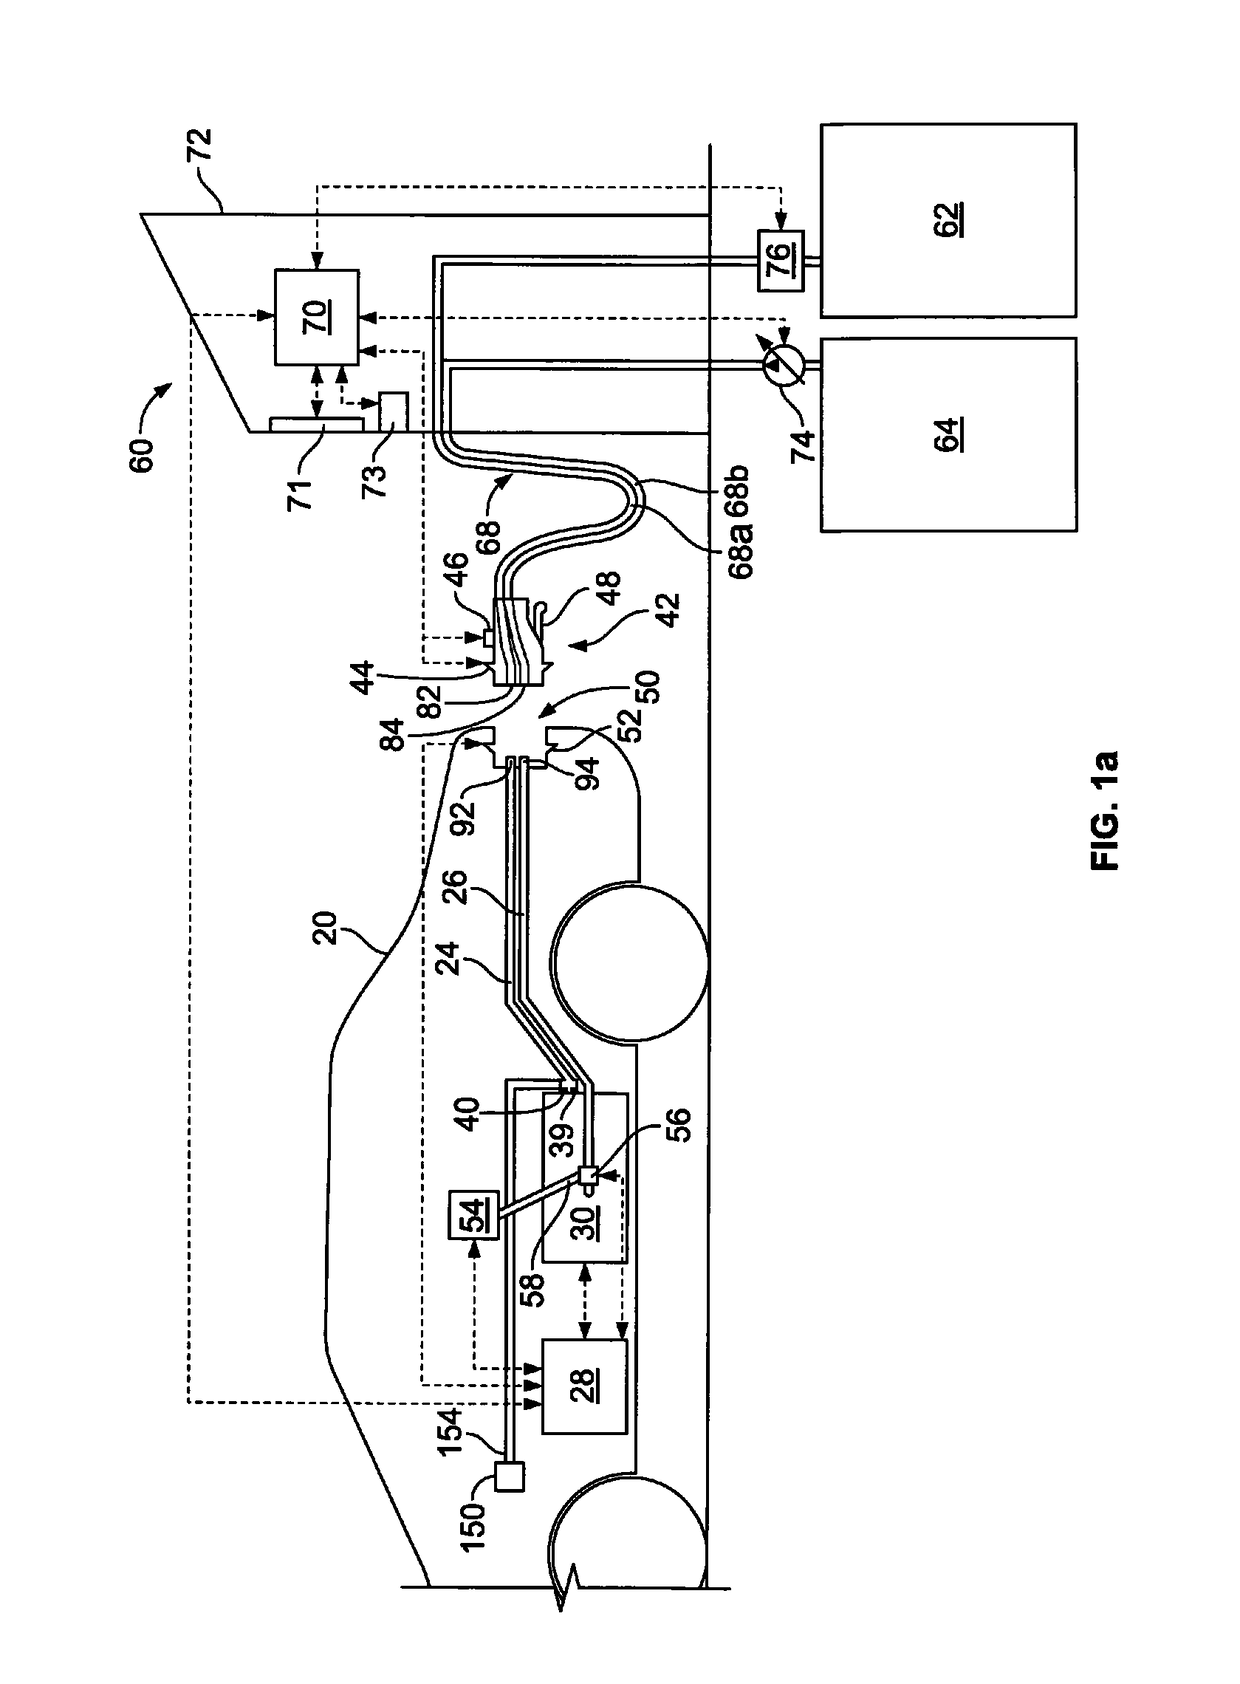 Rapid charging electric vehicle and method and apparatus for rapid charging